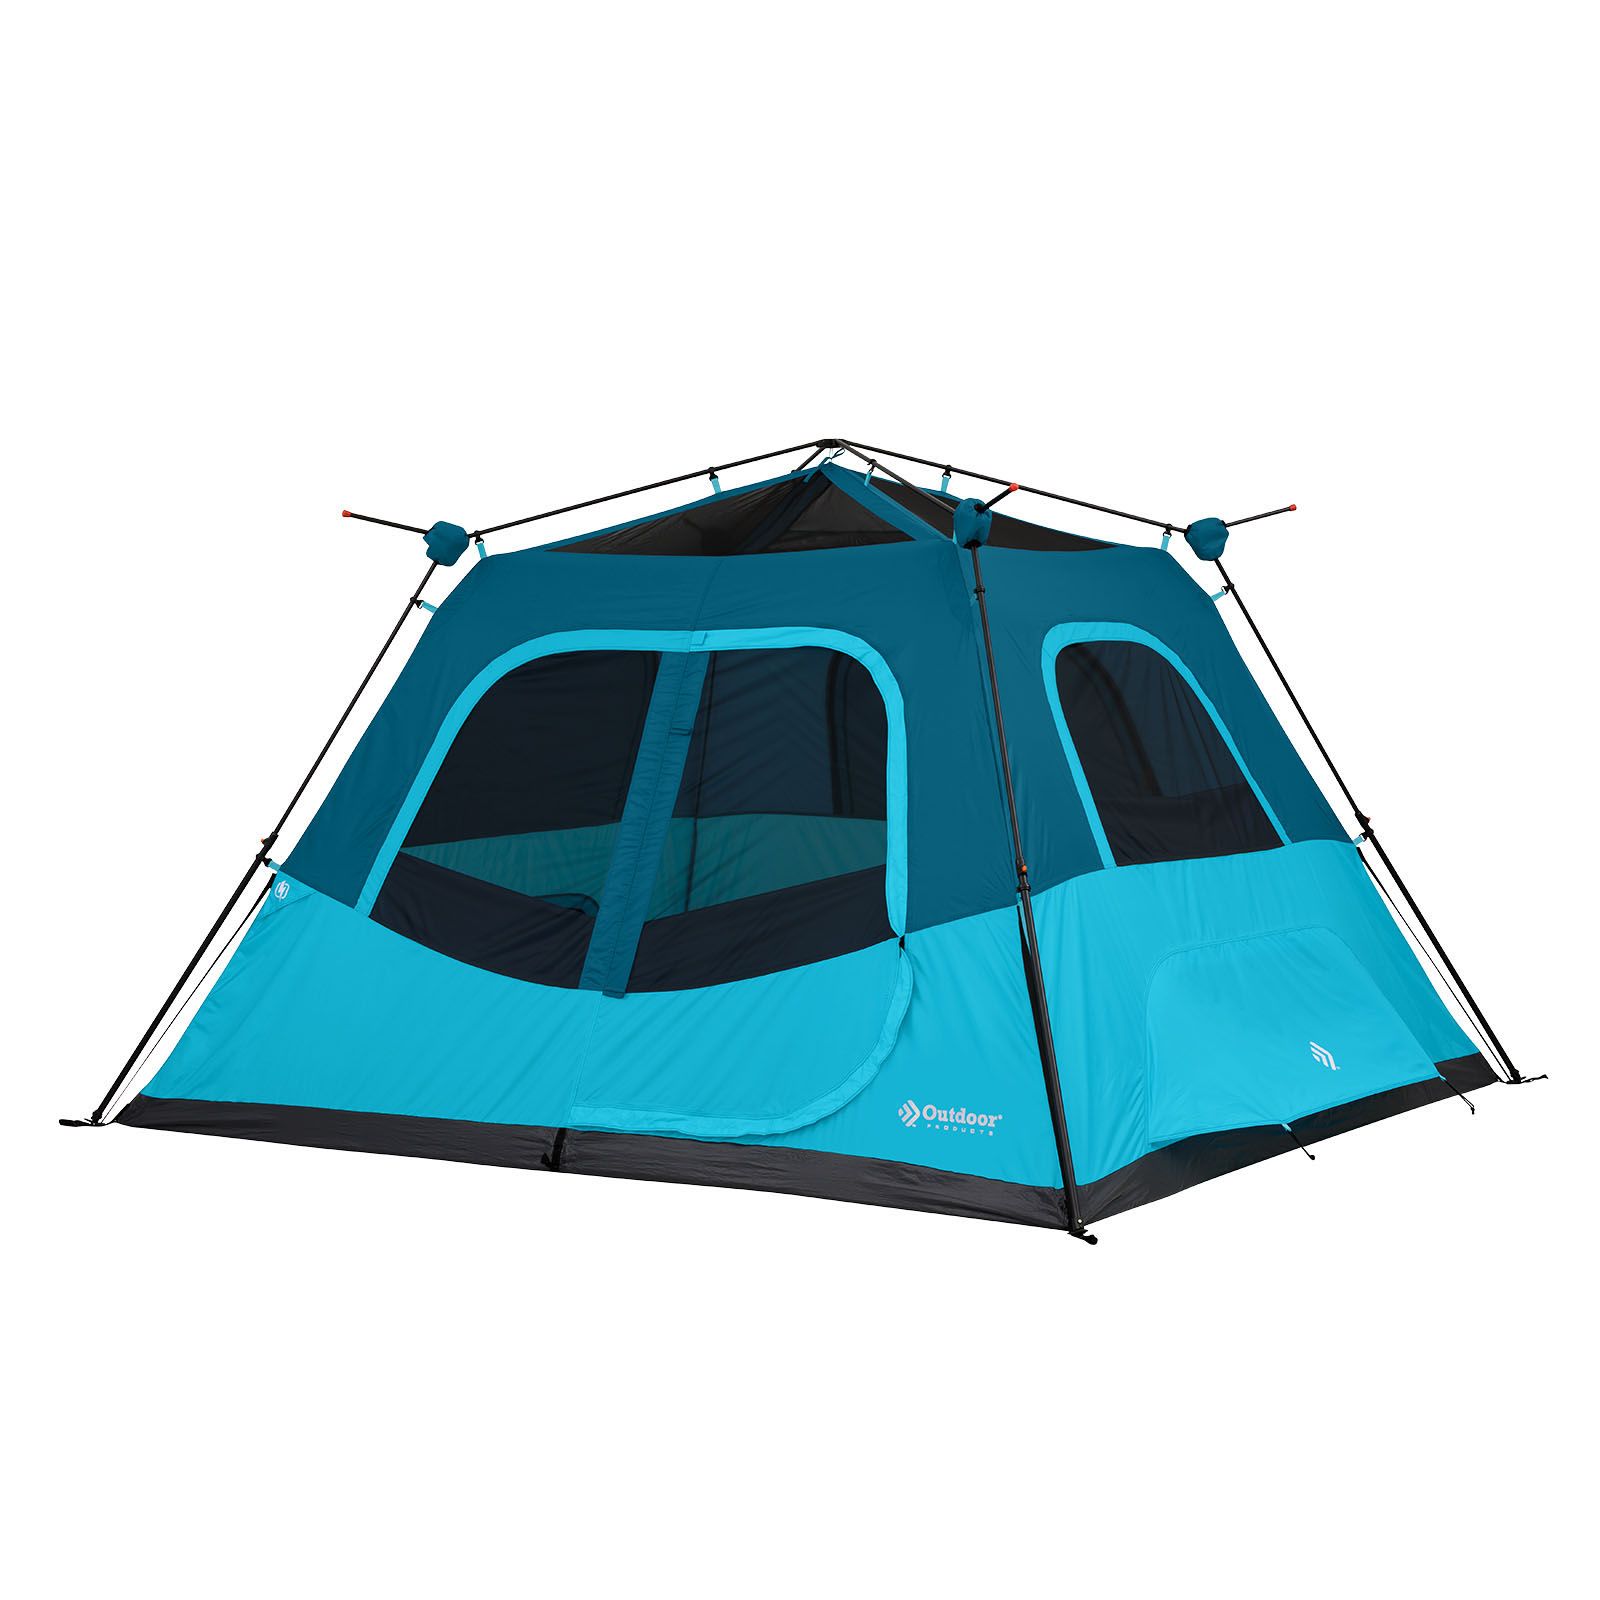 Buy Preserve Series 6 Person Instant Cabin Tent and More